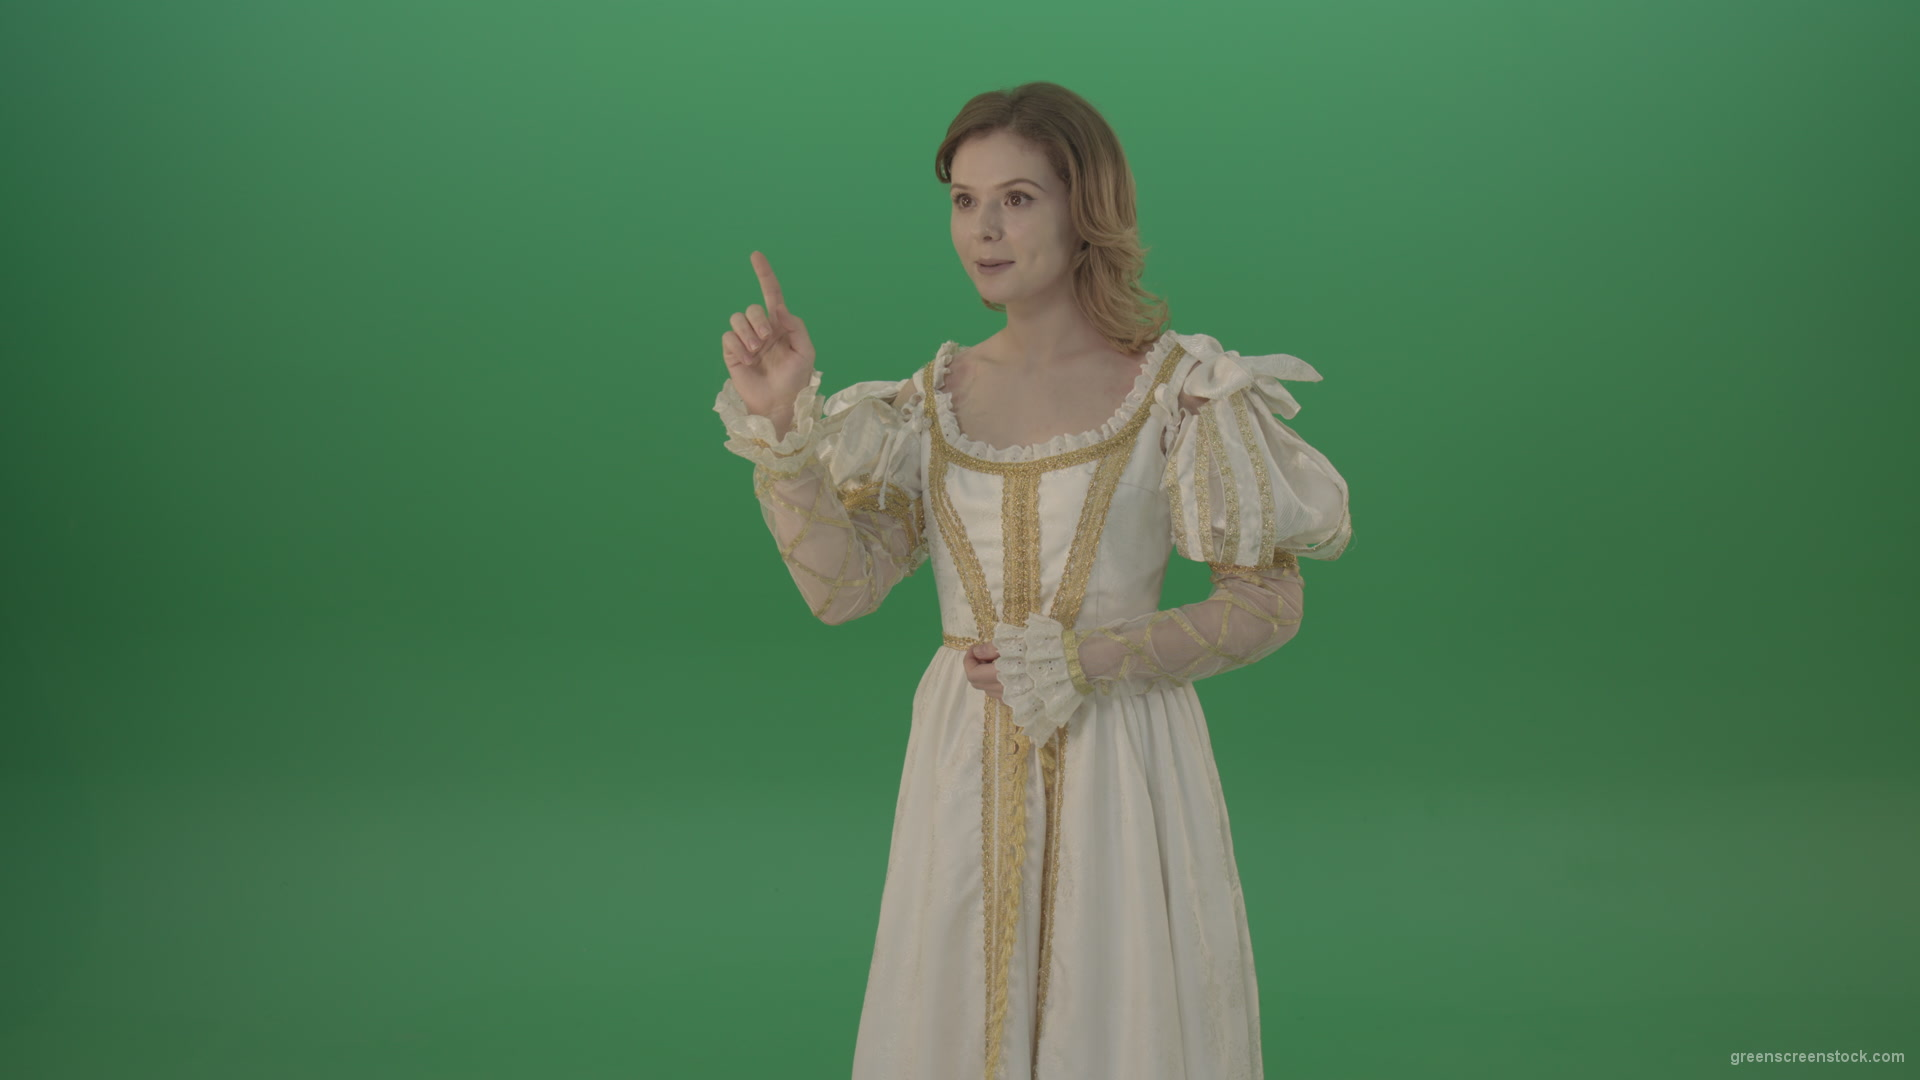 Flipping-a-virtual-reality-screen-the-girl-gladly-looks-at-the-photo-isolated-on-green-screen_006 Green Screen Stock